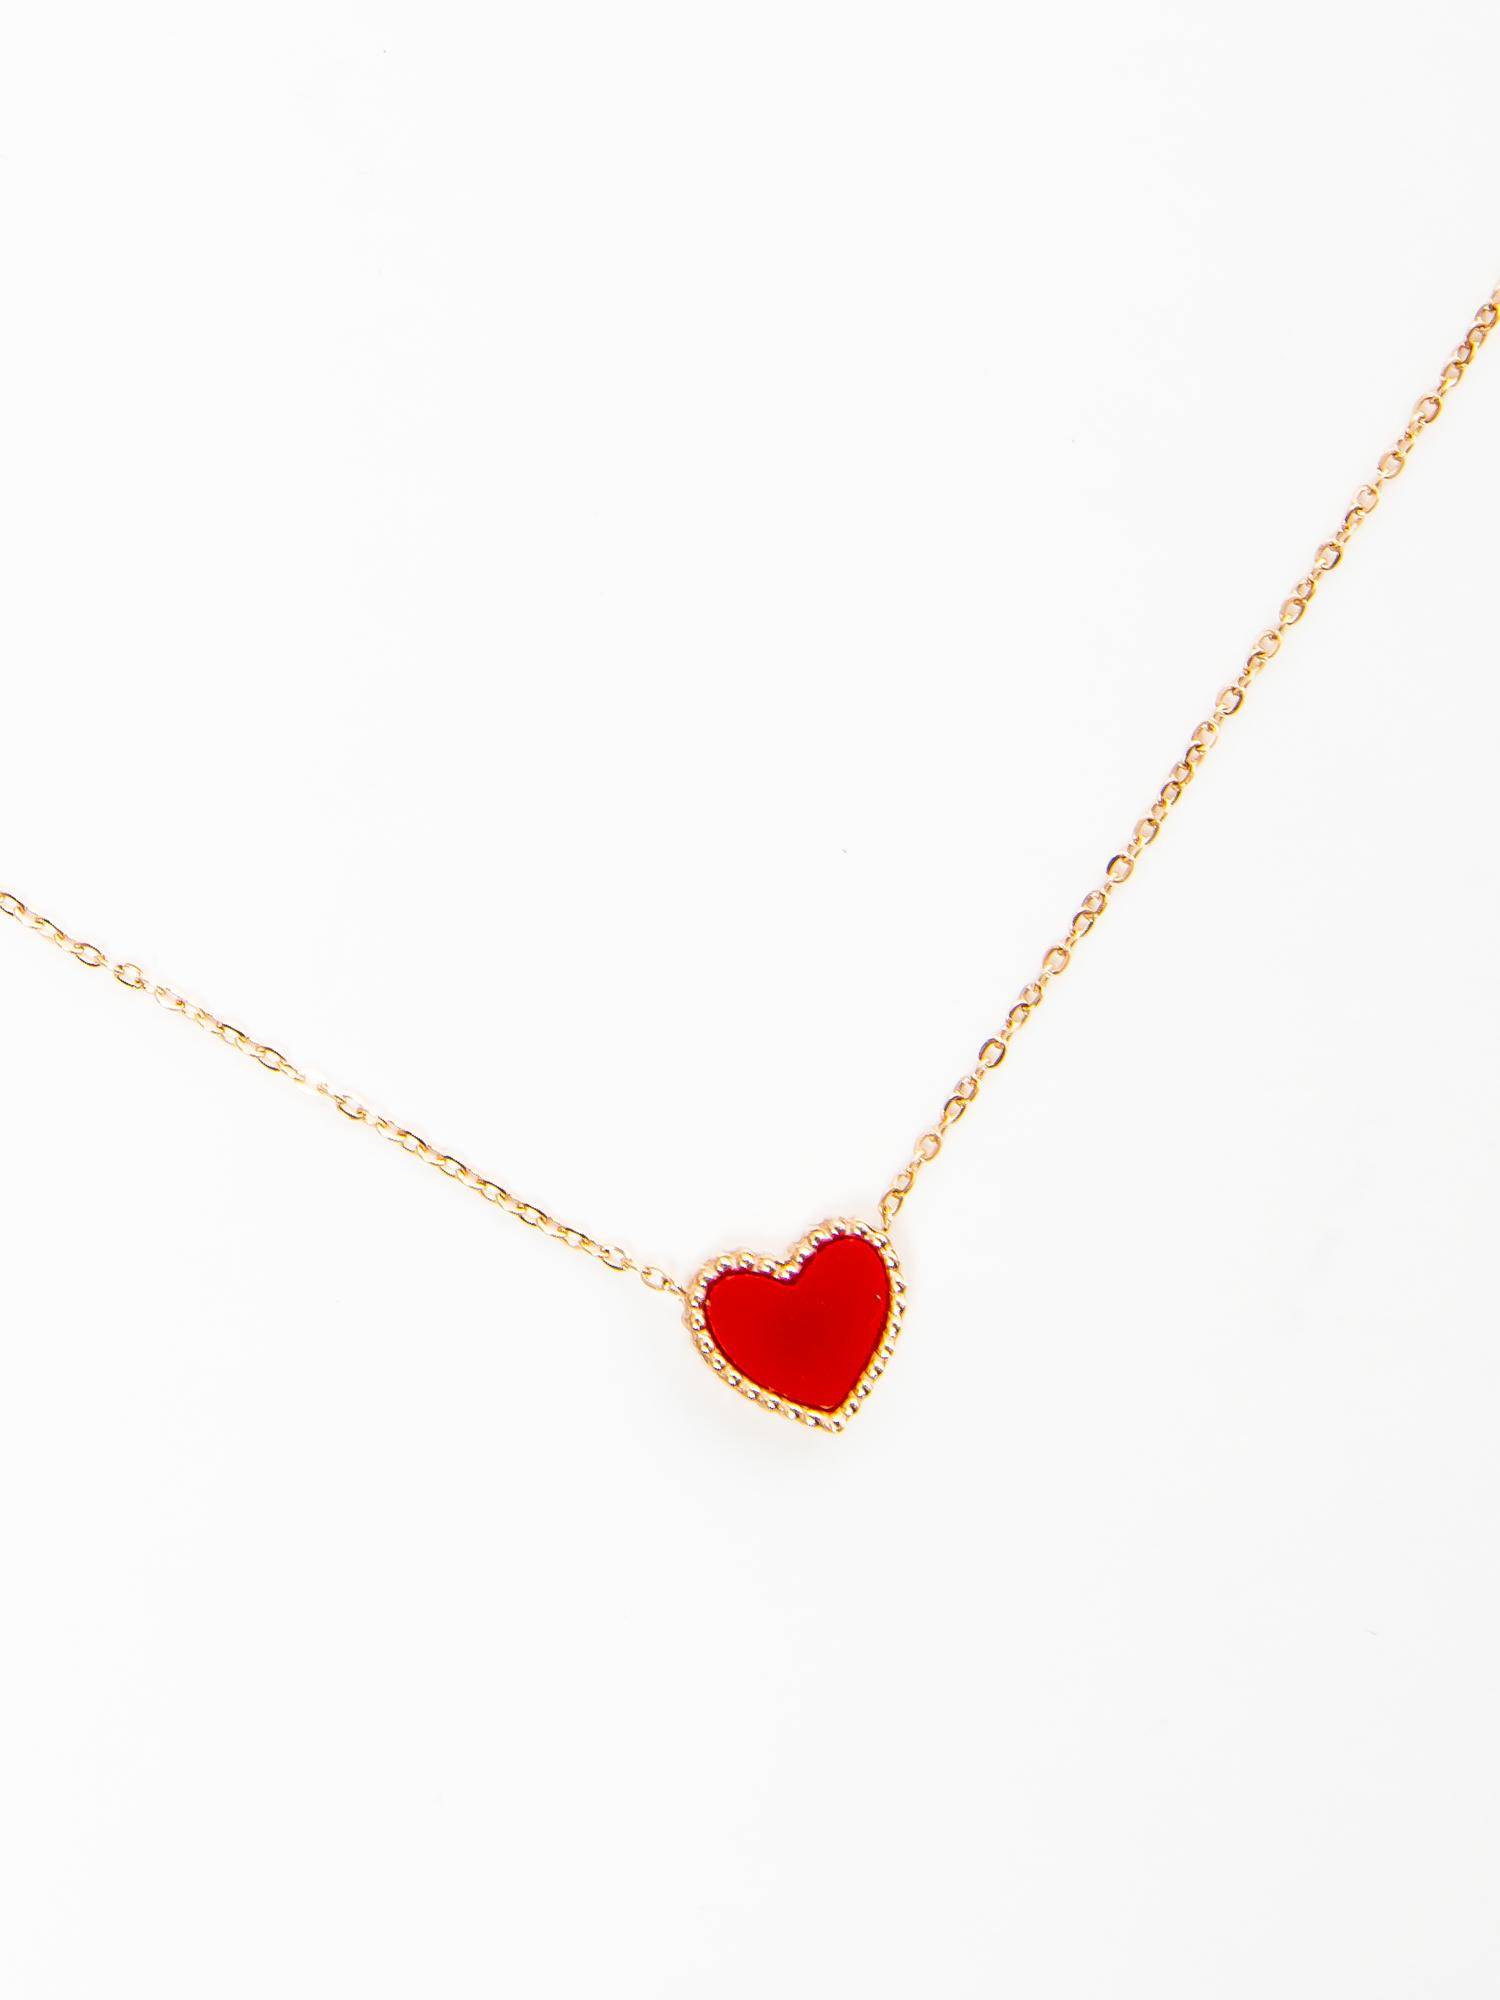 Gold necklace with red heart